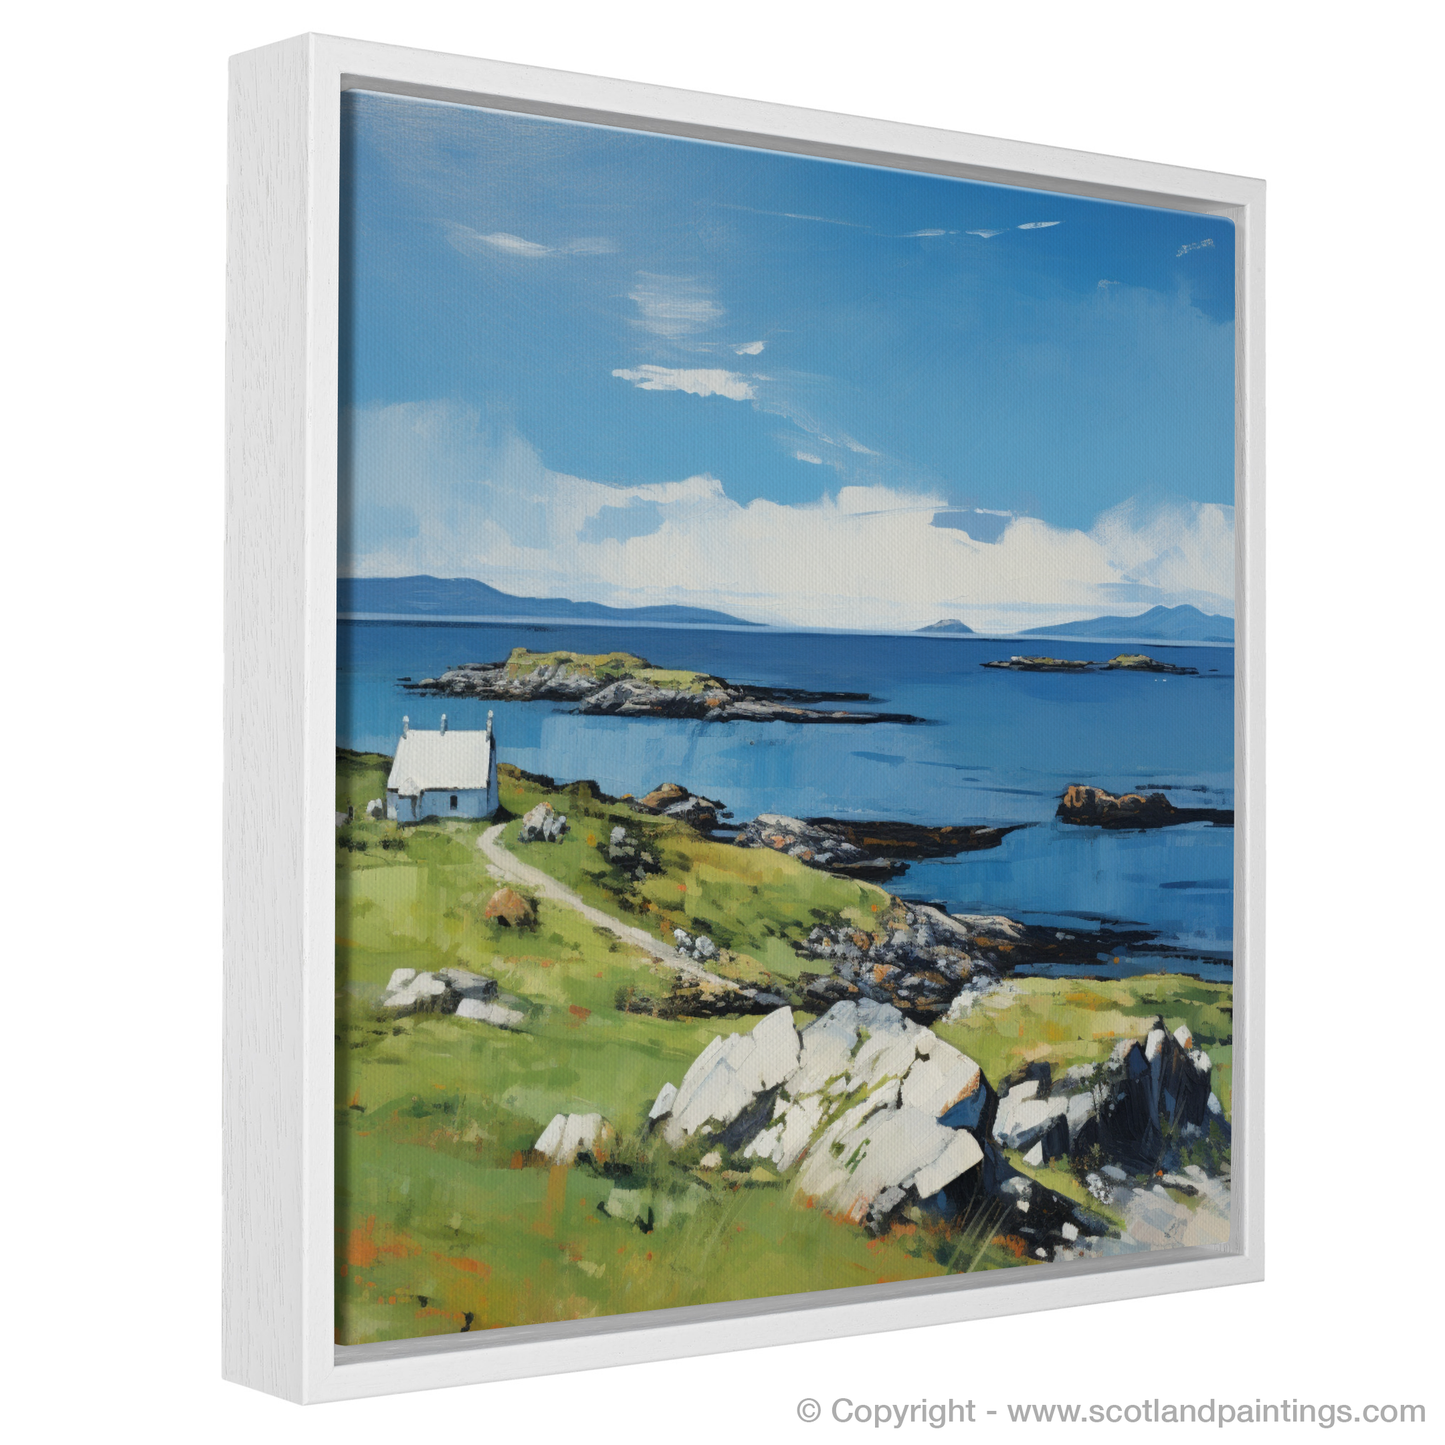 Painting and Art Print of Isle of Scalpay, Outer Hebrides in summer entitled "Isle of Scalpay Summer Serenade".